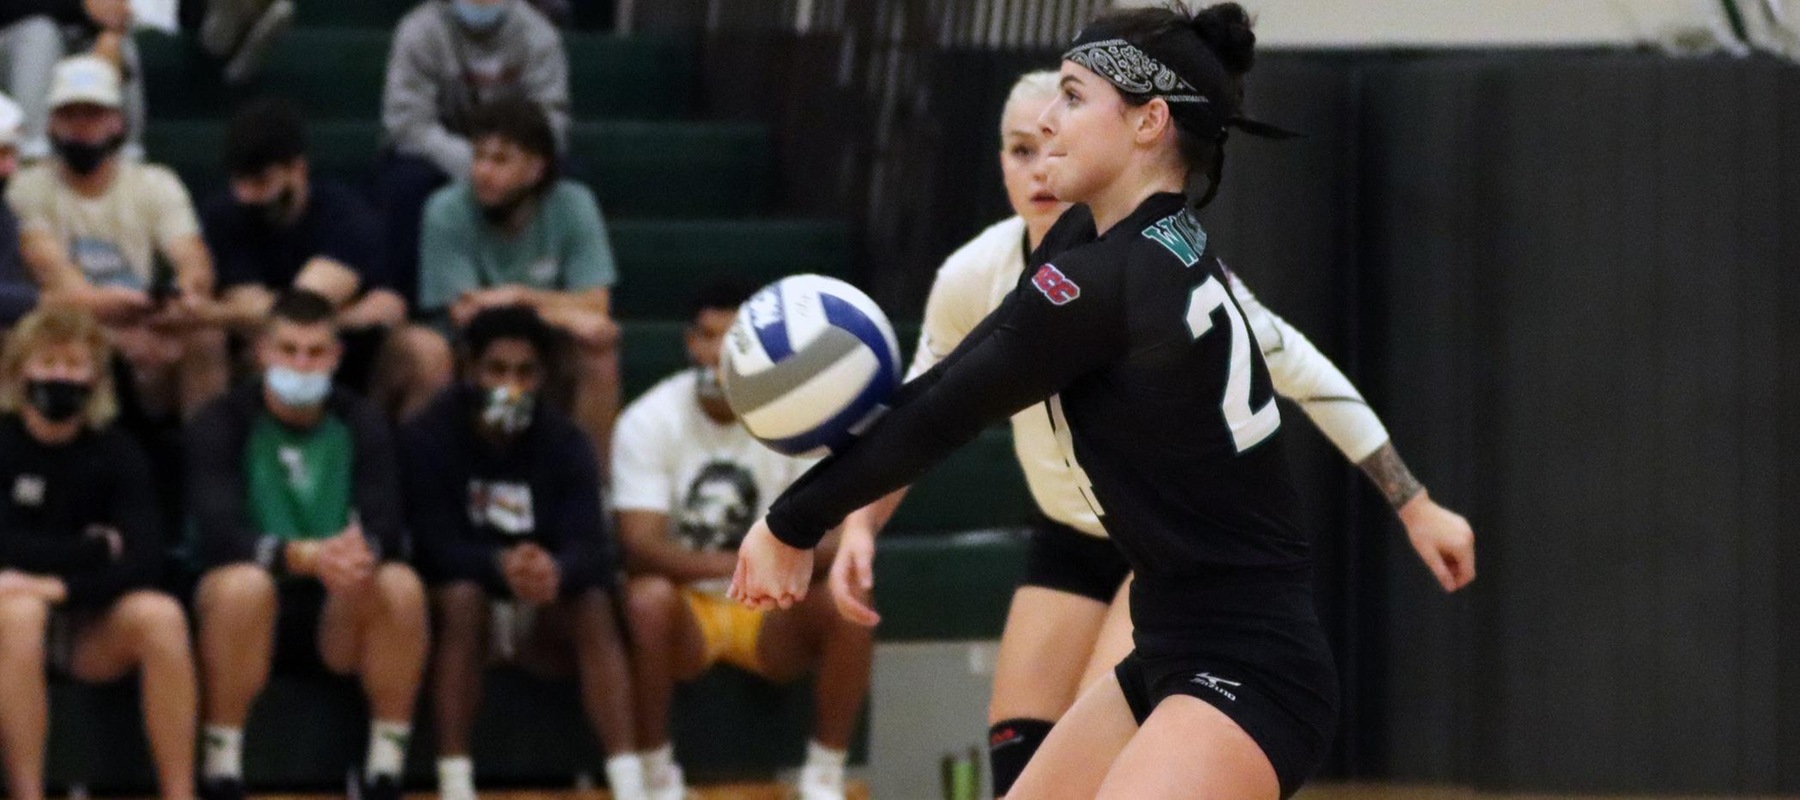 File photo of Elly Collins who picked up 28 digs at Jefferson. Copyright 2021; Wilmington University. All rights reserved. Photo by Dan Lauletta. October 23, 2021 vs. Millersville